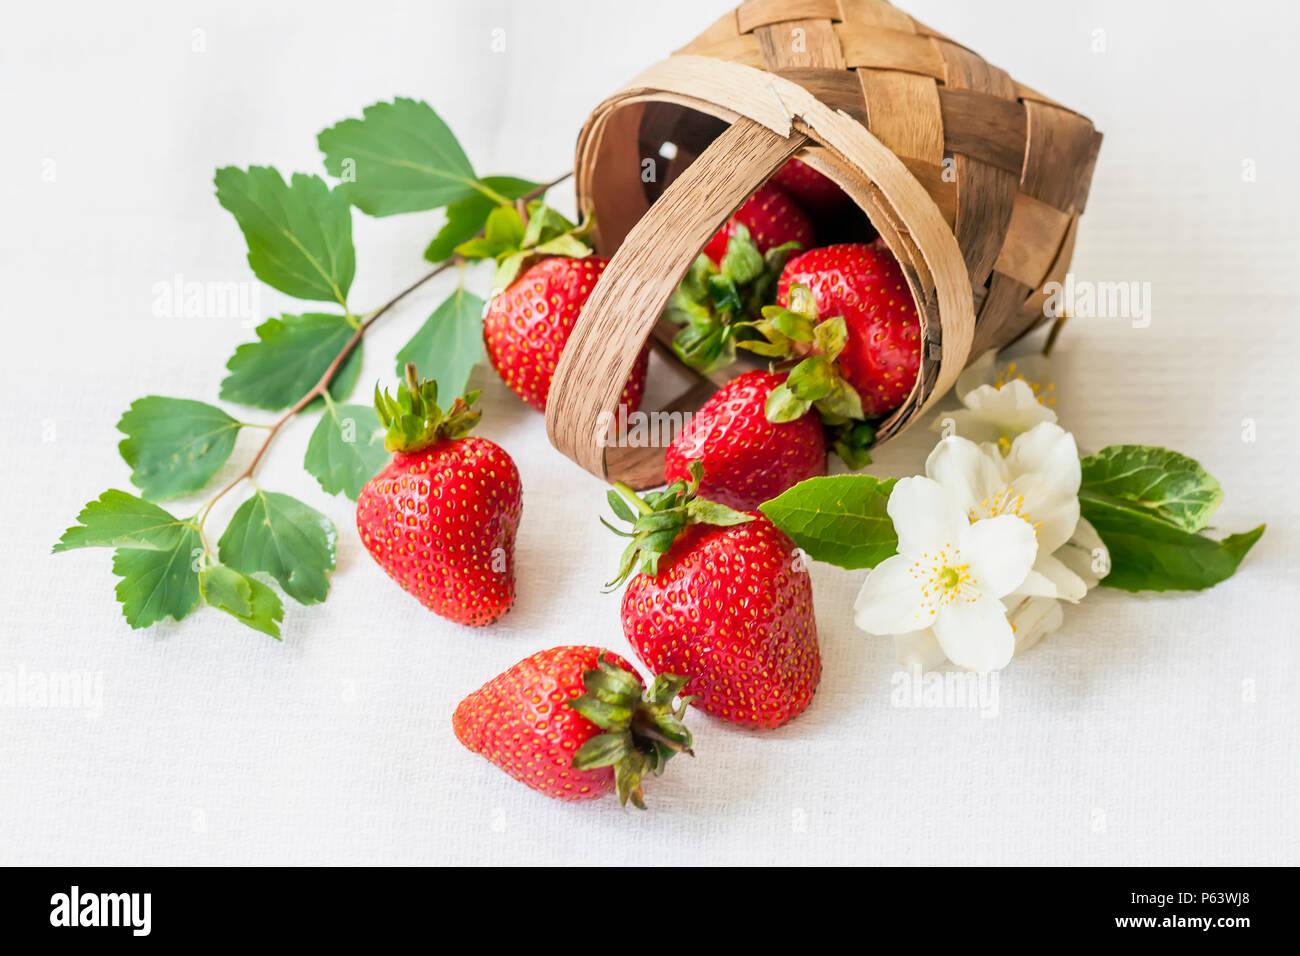 Miniature reclining basket with ripe strawberries, flowers, green foliage on light background. Concept of healthy food, detox, vitamins, dieting Stock Photo